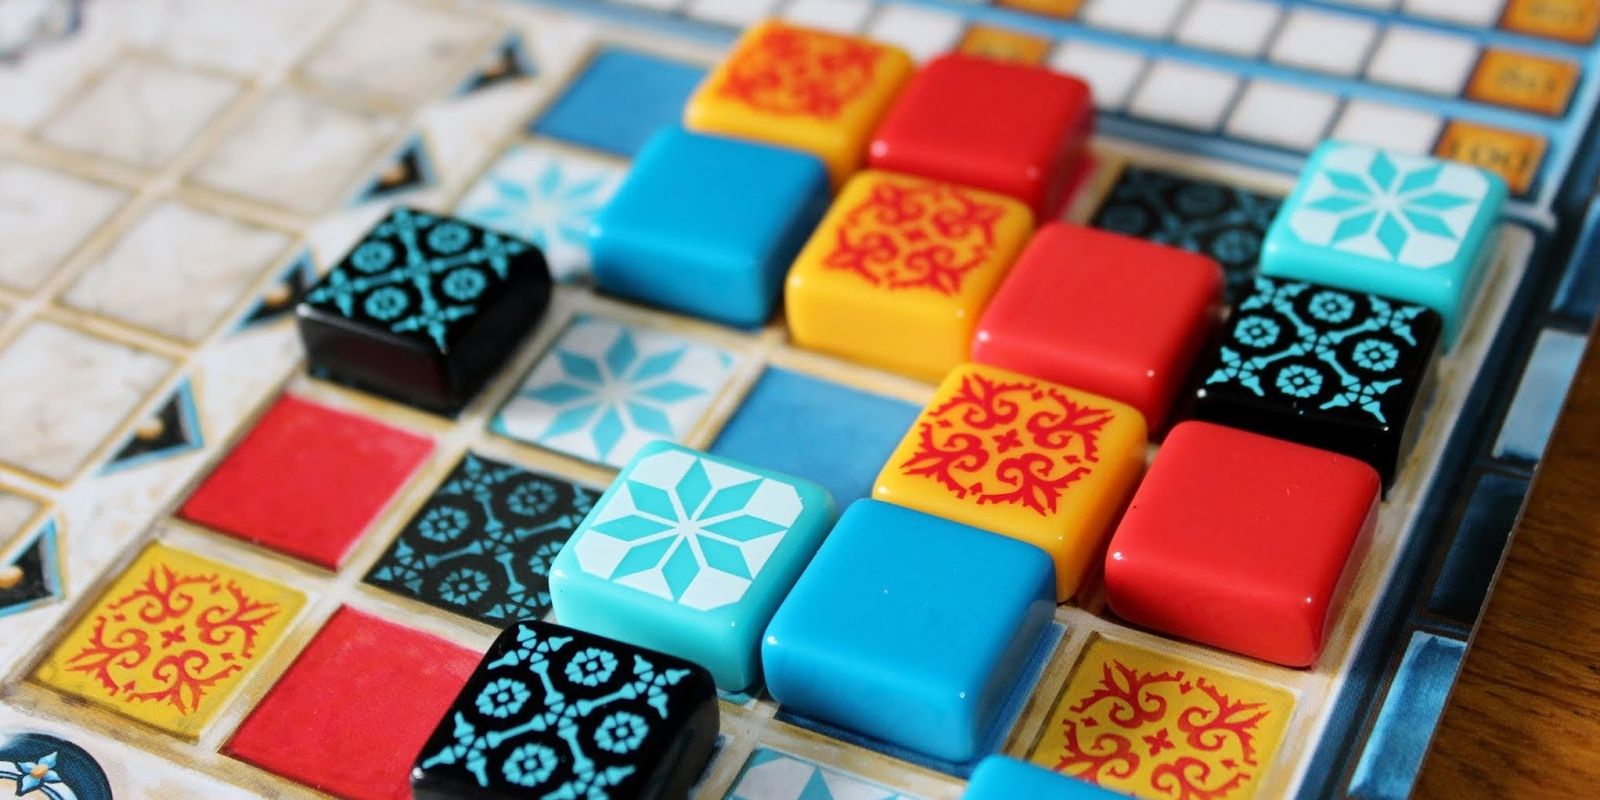 Several tiles from Azul board game.